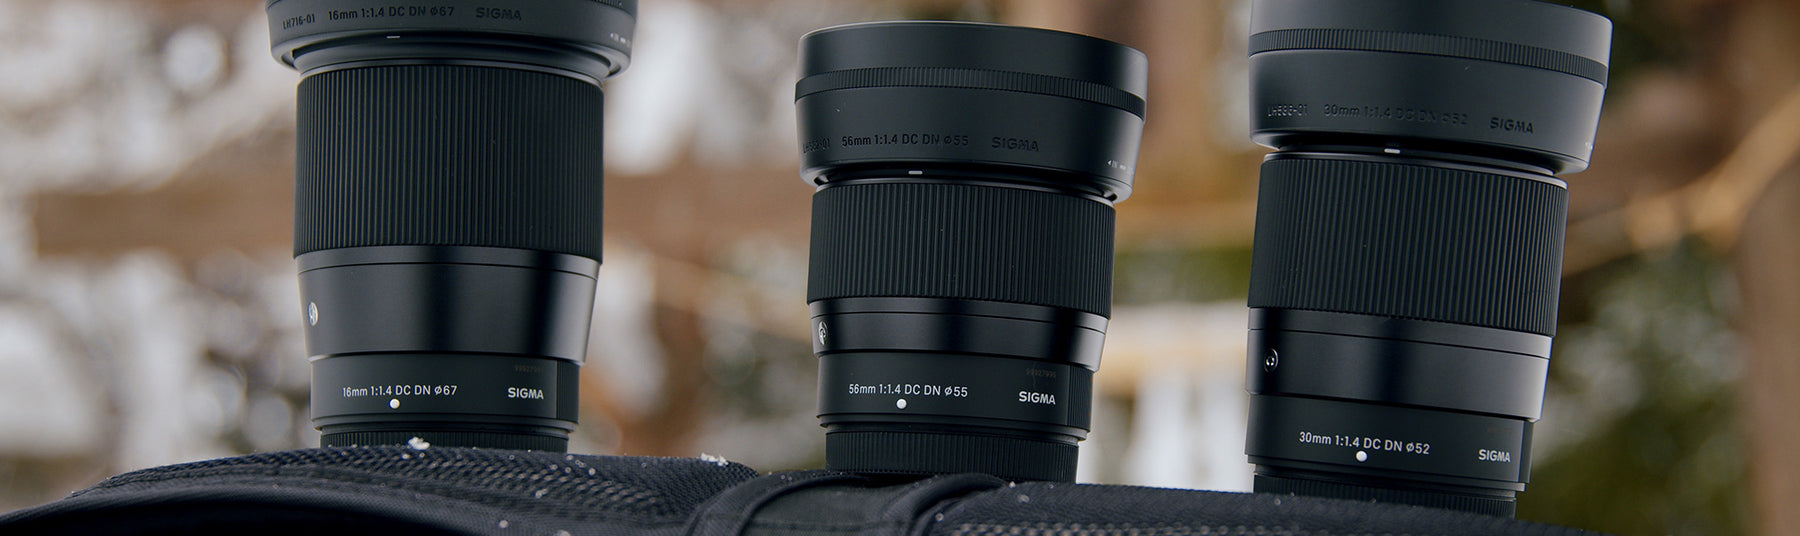 SIGMA launches interchangeable lenses for Nikon Z Mount system